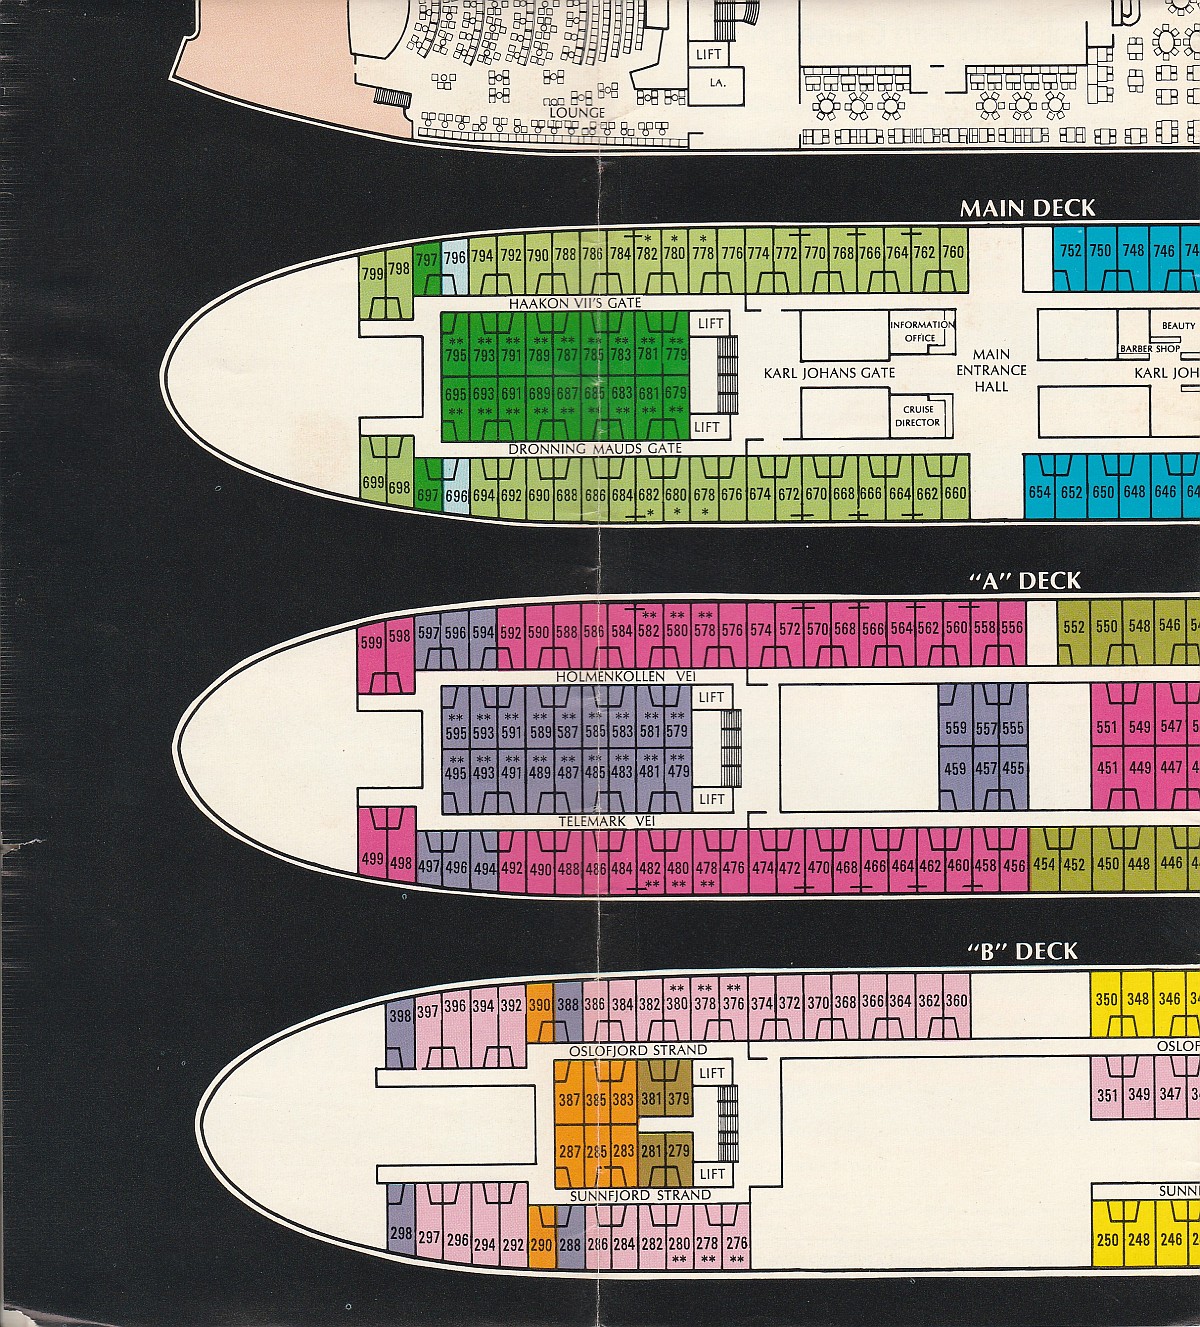 ms Song of Norway Aft deck plans: Restaurant Deck, Main Deck, A Deck and B Deck